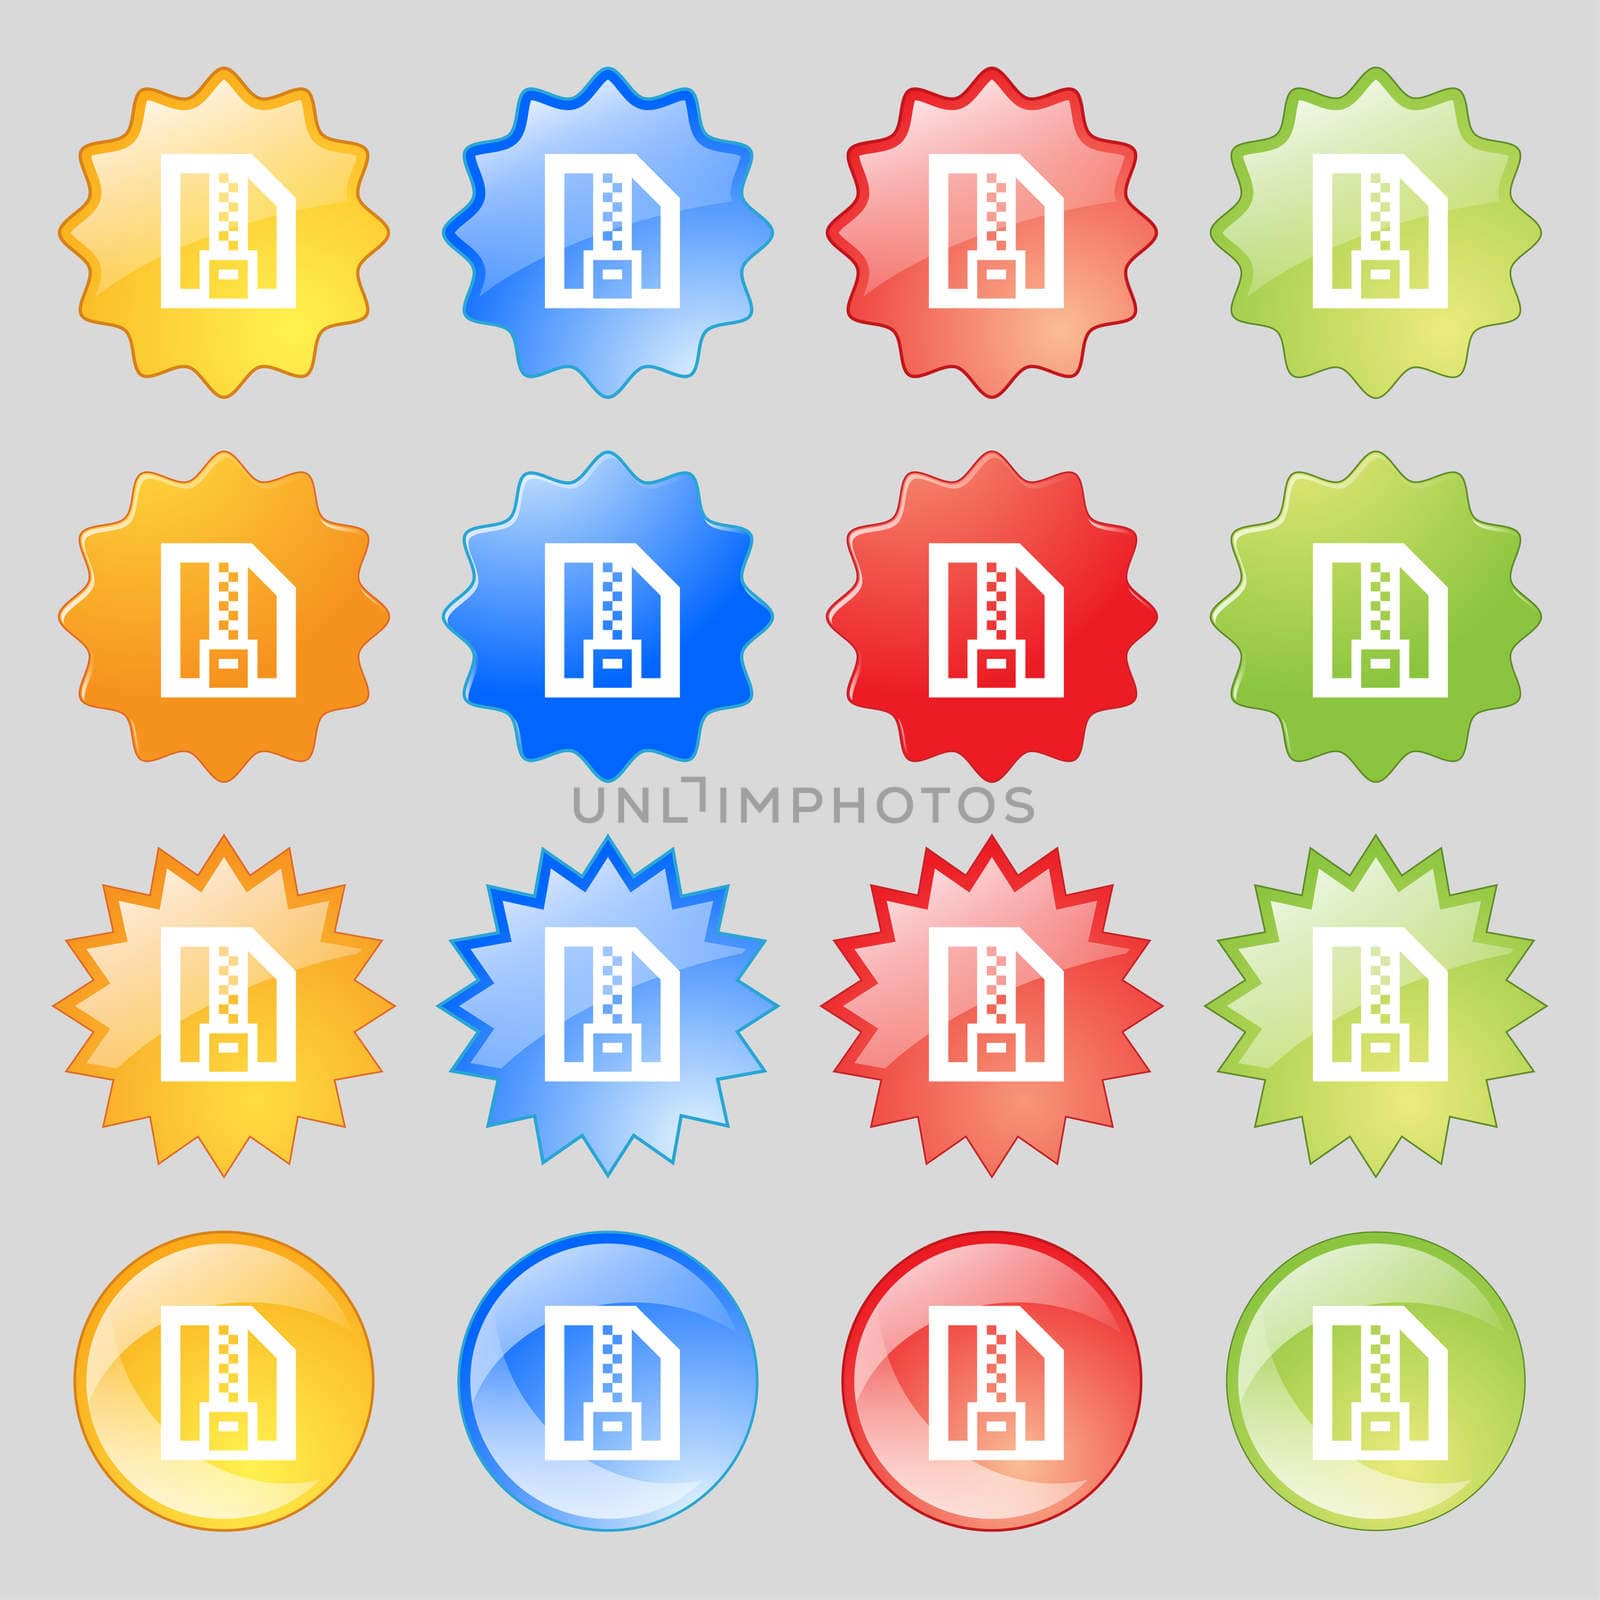 Archive file, Download compressed, ZIP zipped icon sign. Big set of 16 colorful modern buttons for your design.  by serhii_lohvyniuk